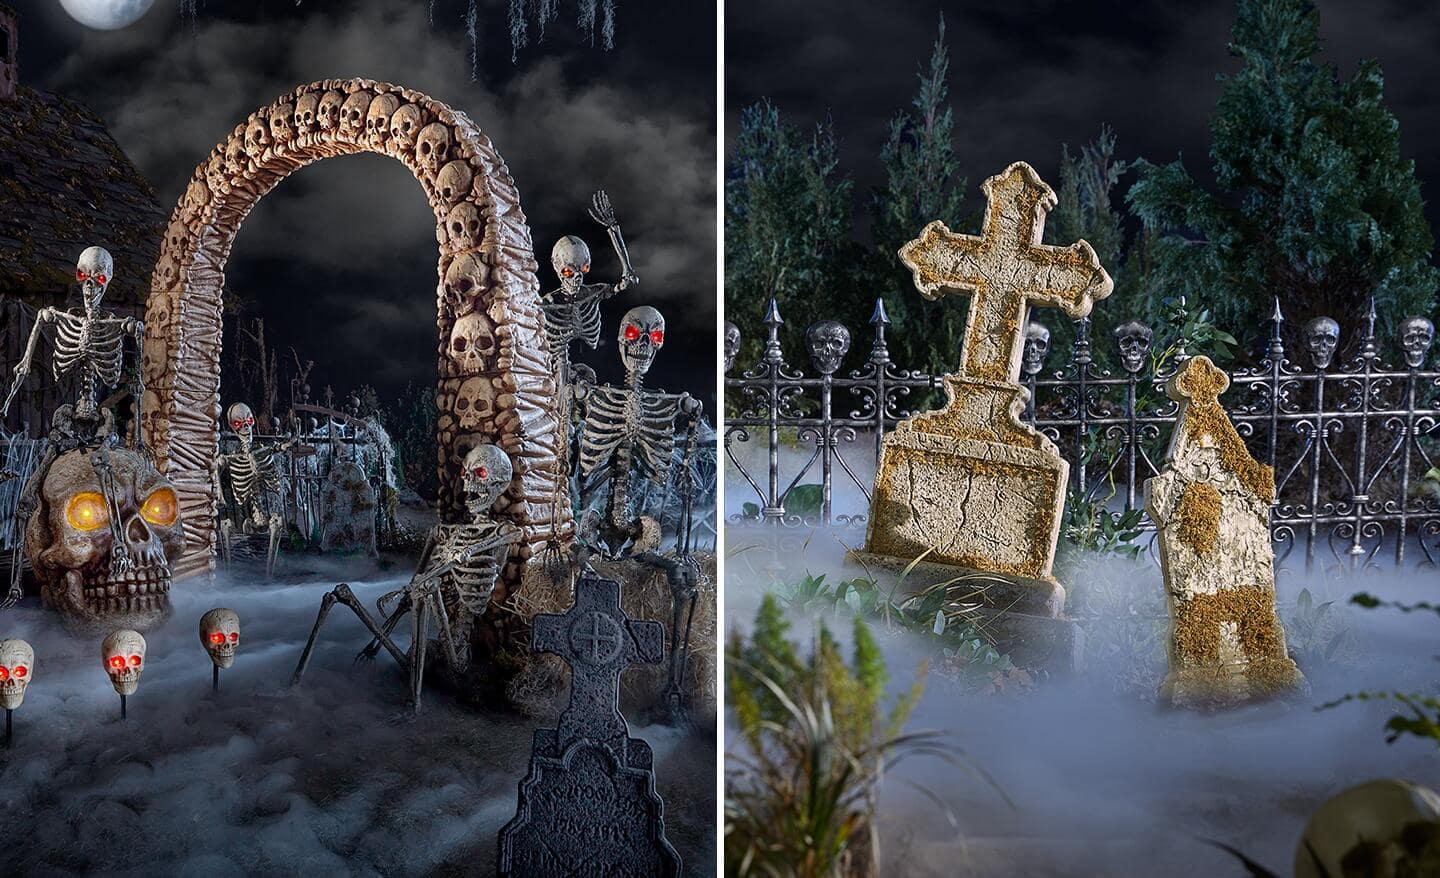 A dual image features skeletons with glowing red eyes sitting and standing among gravestones in a Halloween cemetery scene with a close up up gravestones on the right.